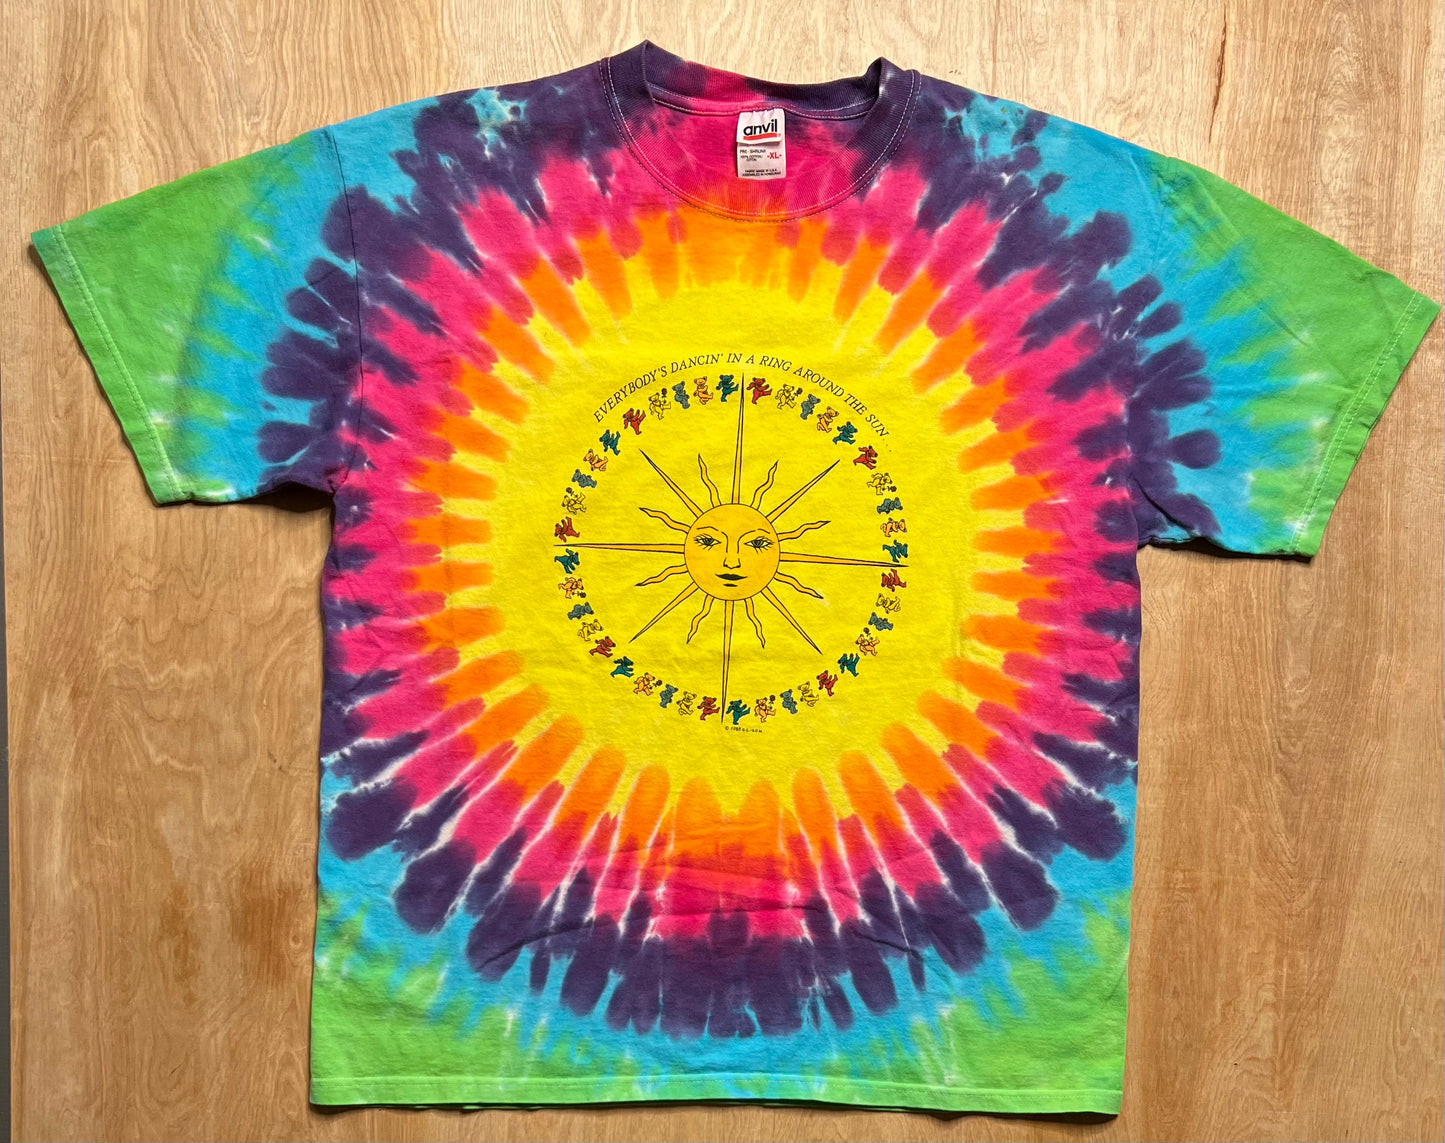 Vintage Grateful Dead " Everybody's Dancin' In A Ring Around The Sun" T-Shirt